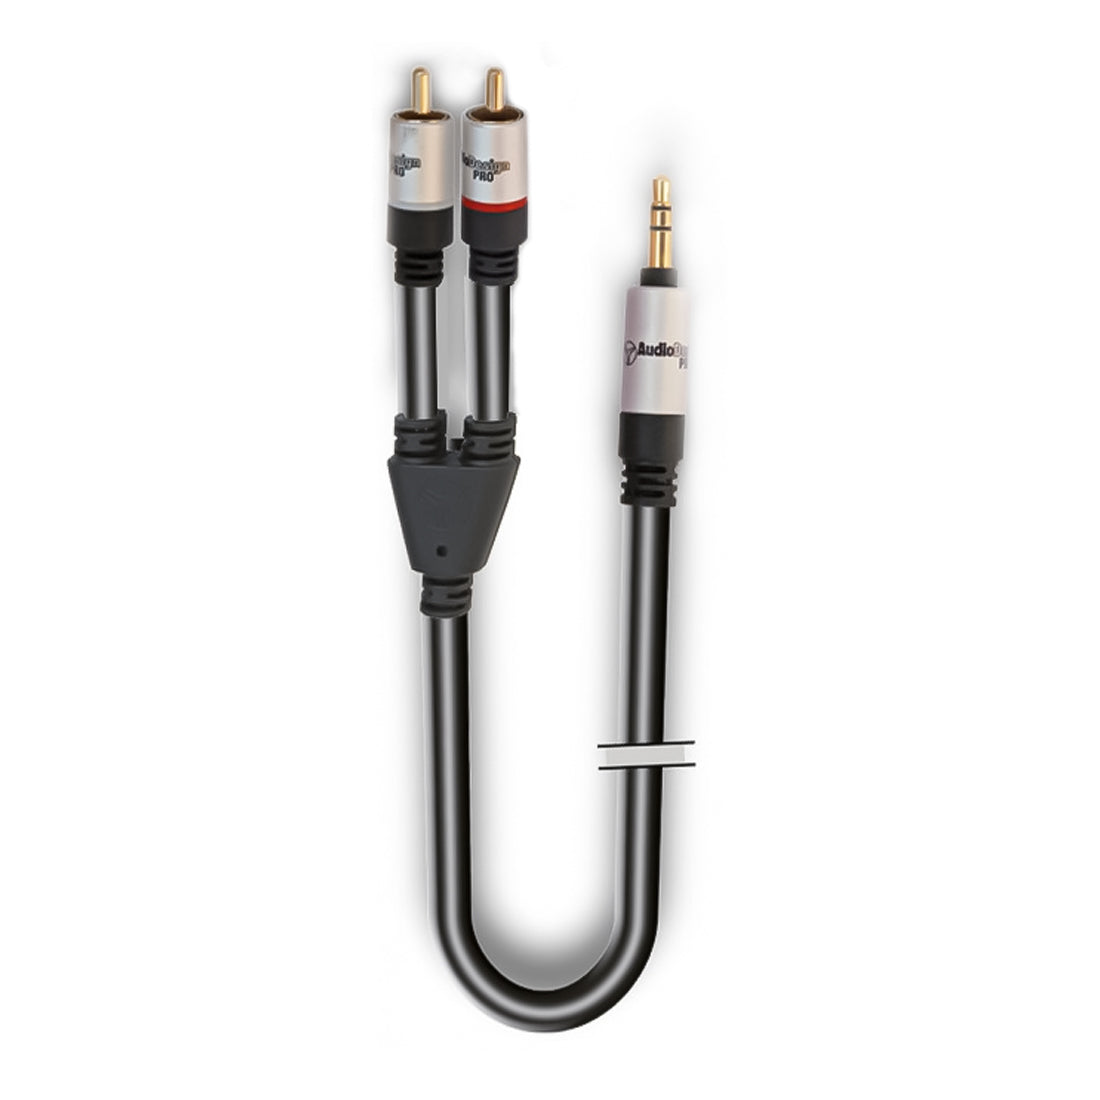 Audiodesign X-Pro audio adapter cable 1.5m converter from 1 3.5mm jack male to 2 RCA male